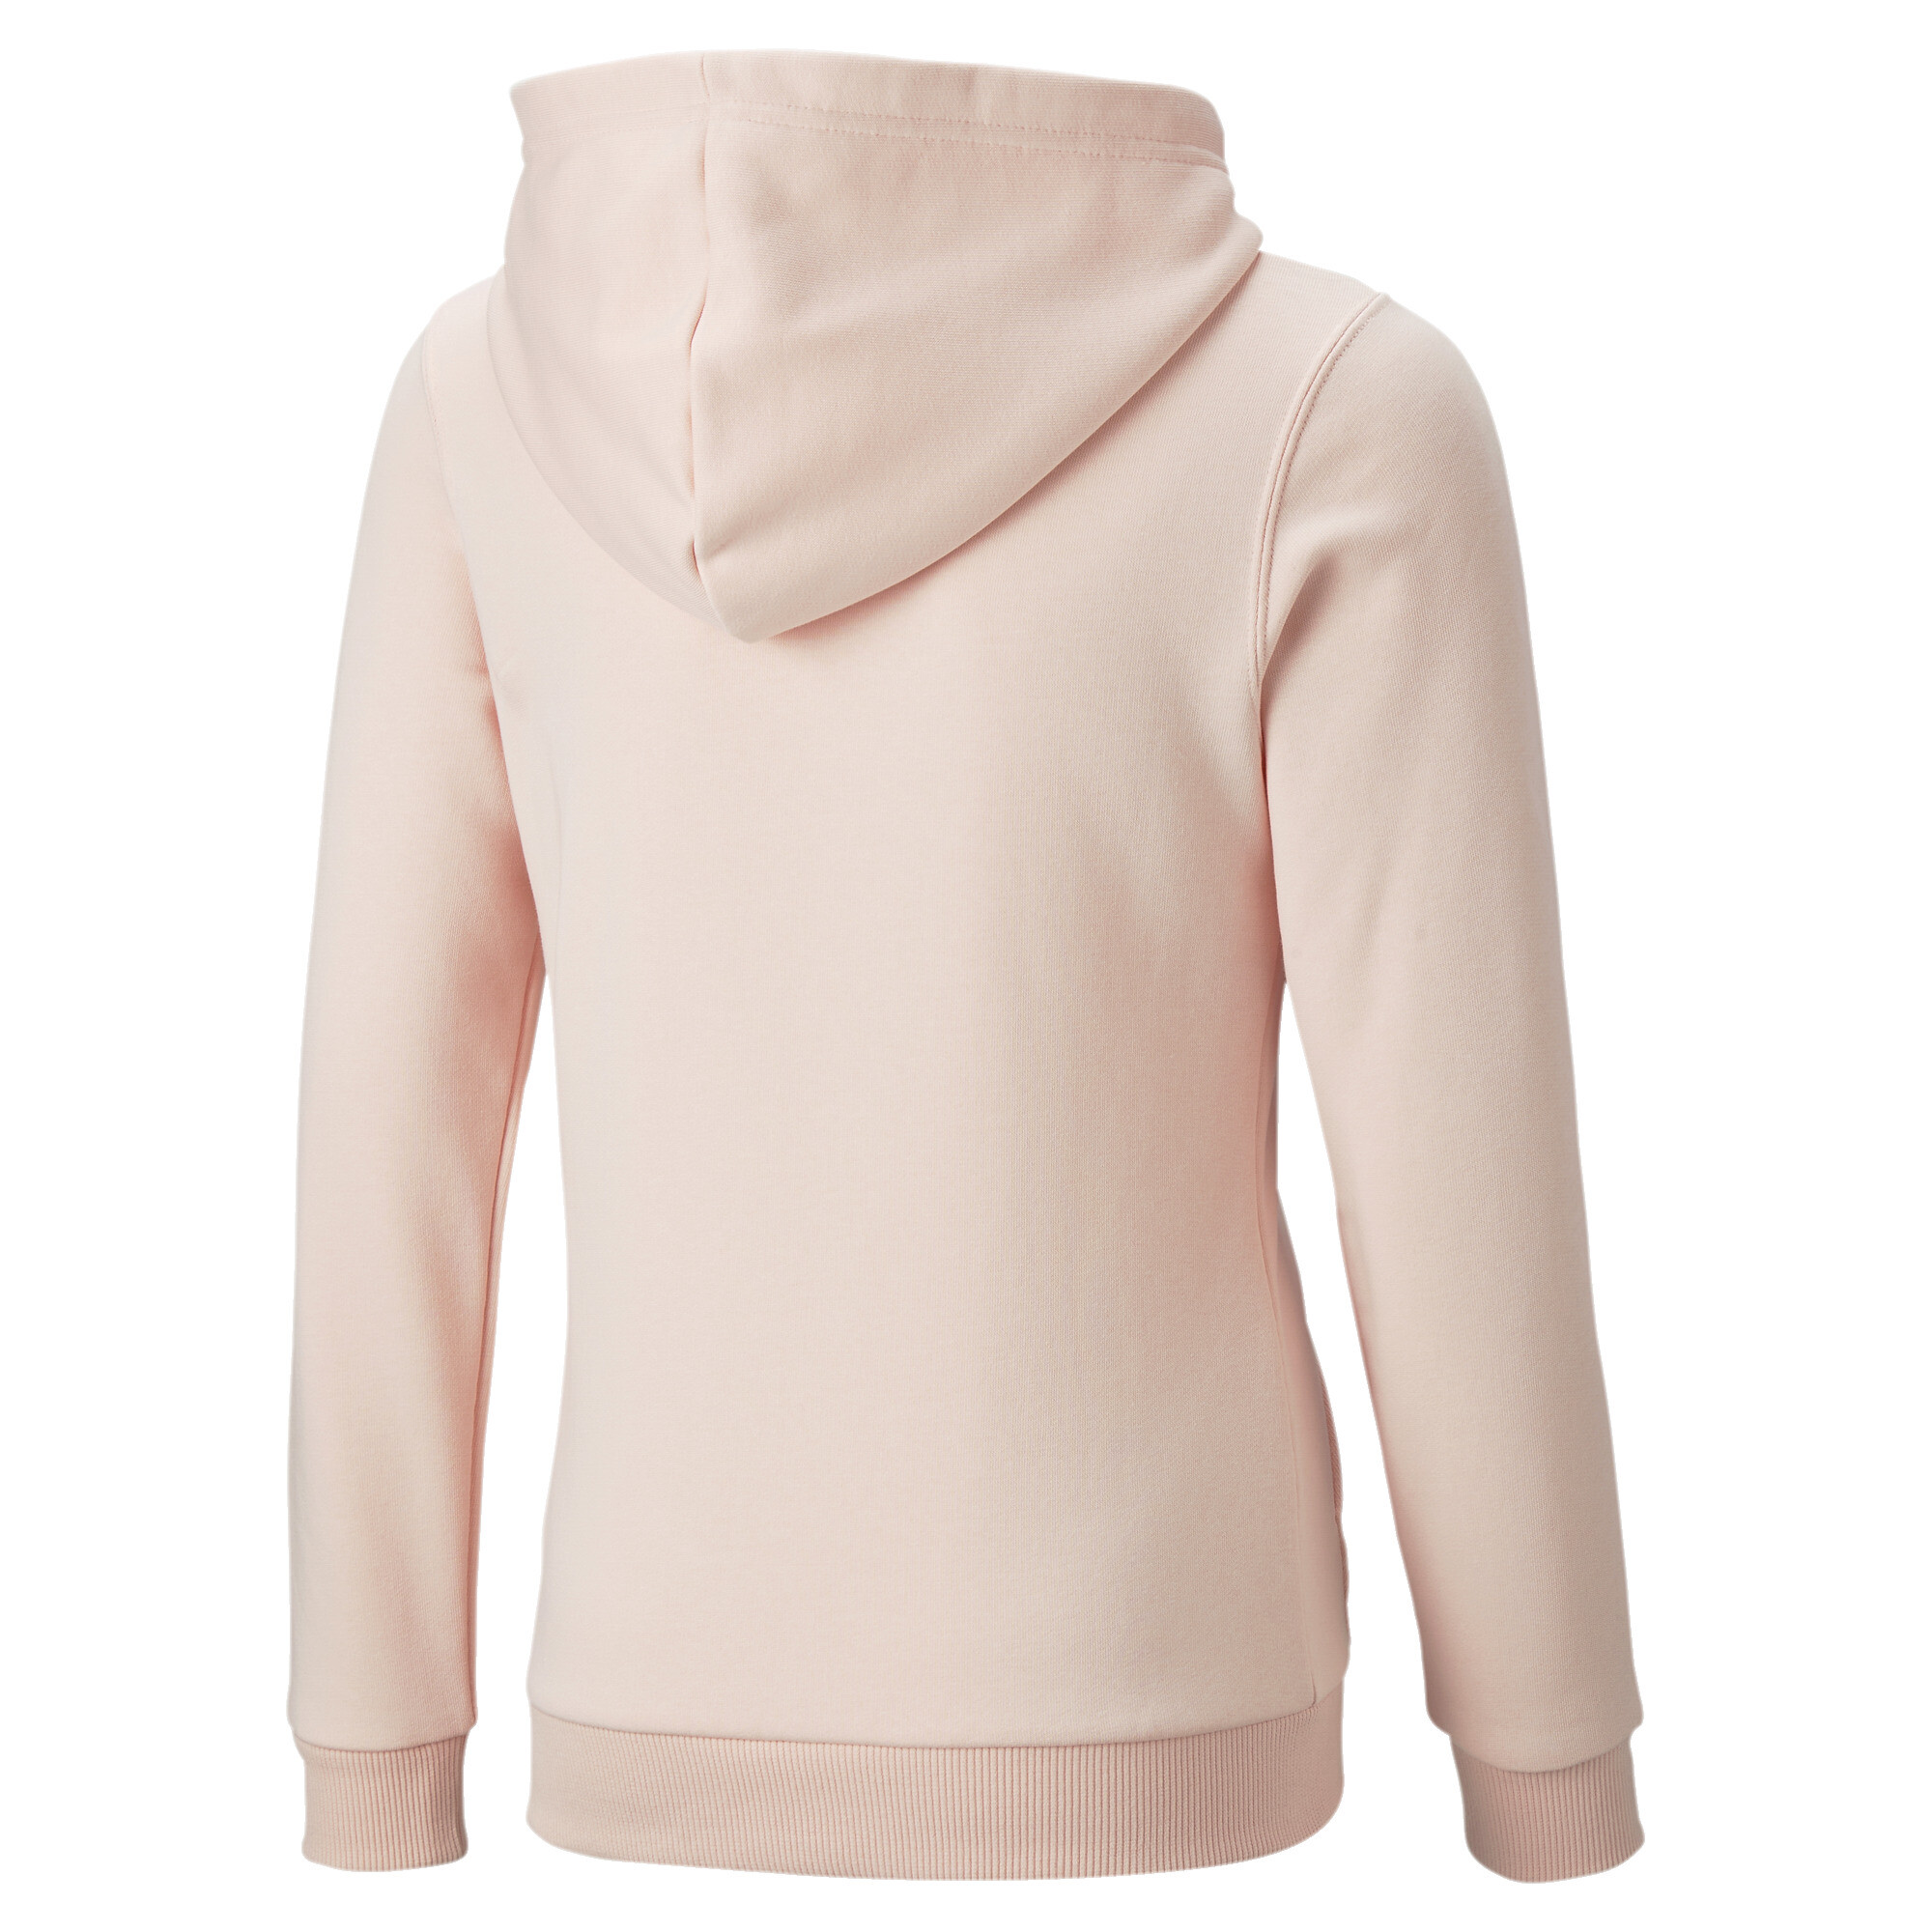 PUMA Classics Logo Hoodie In 70 - Pink, Size 7-8 Youth